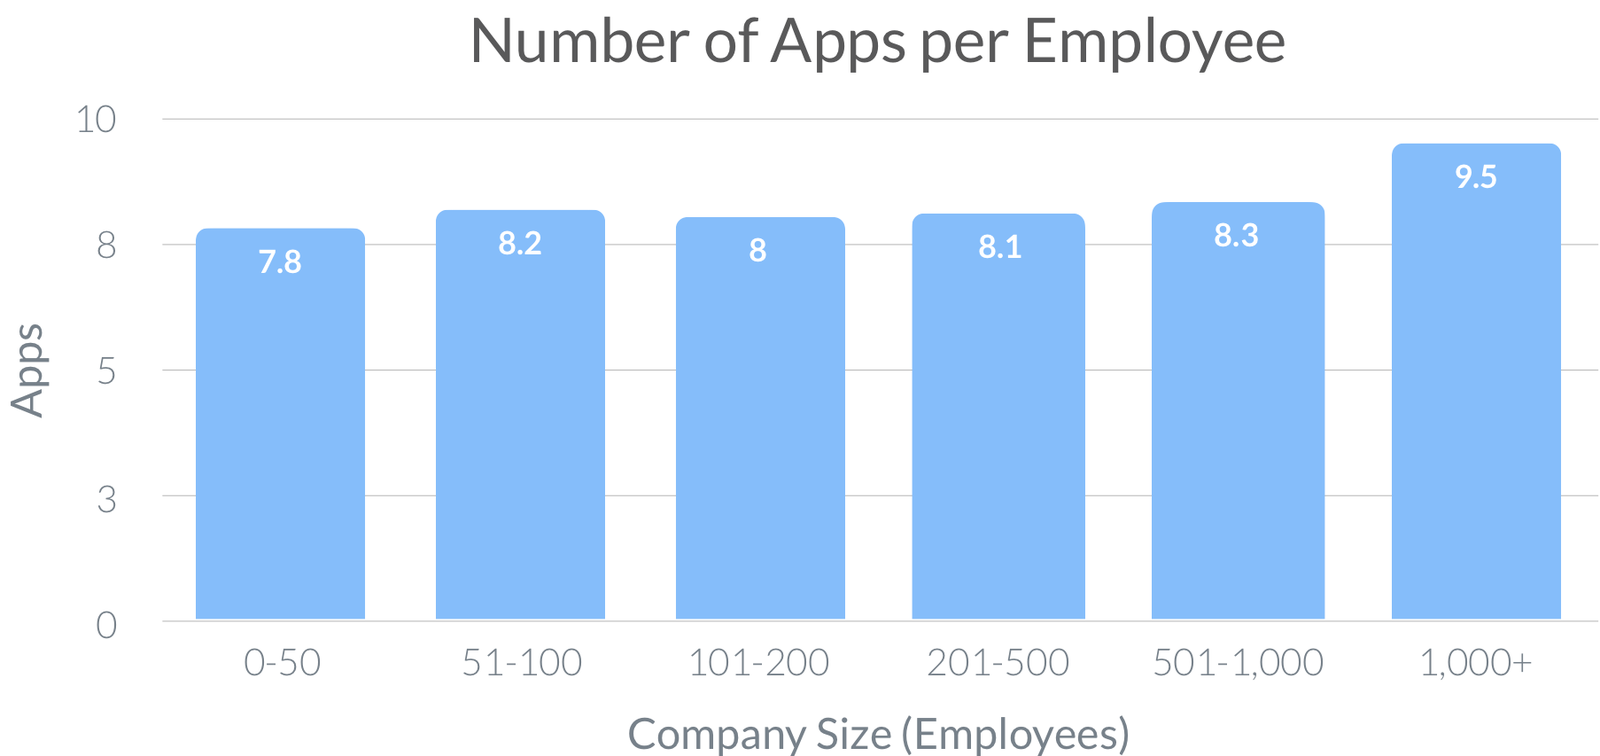 Number-of-Apps-per-Employee